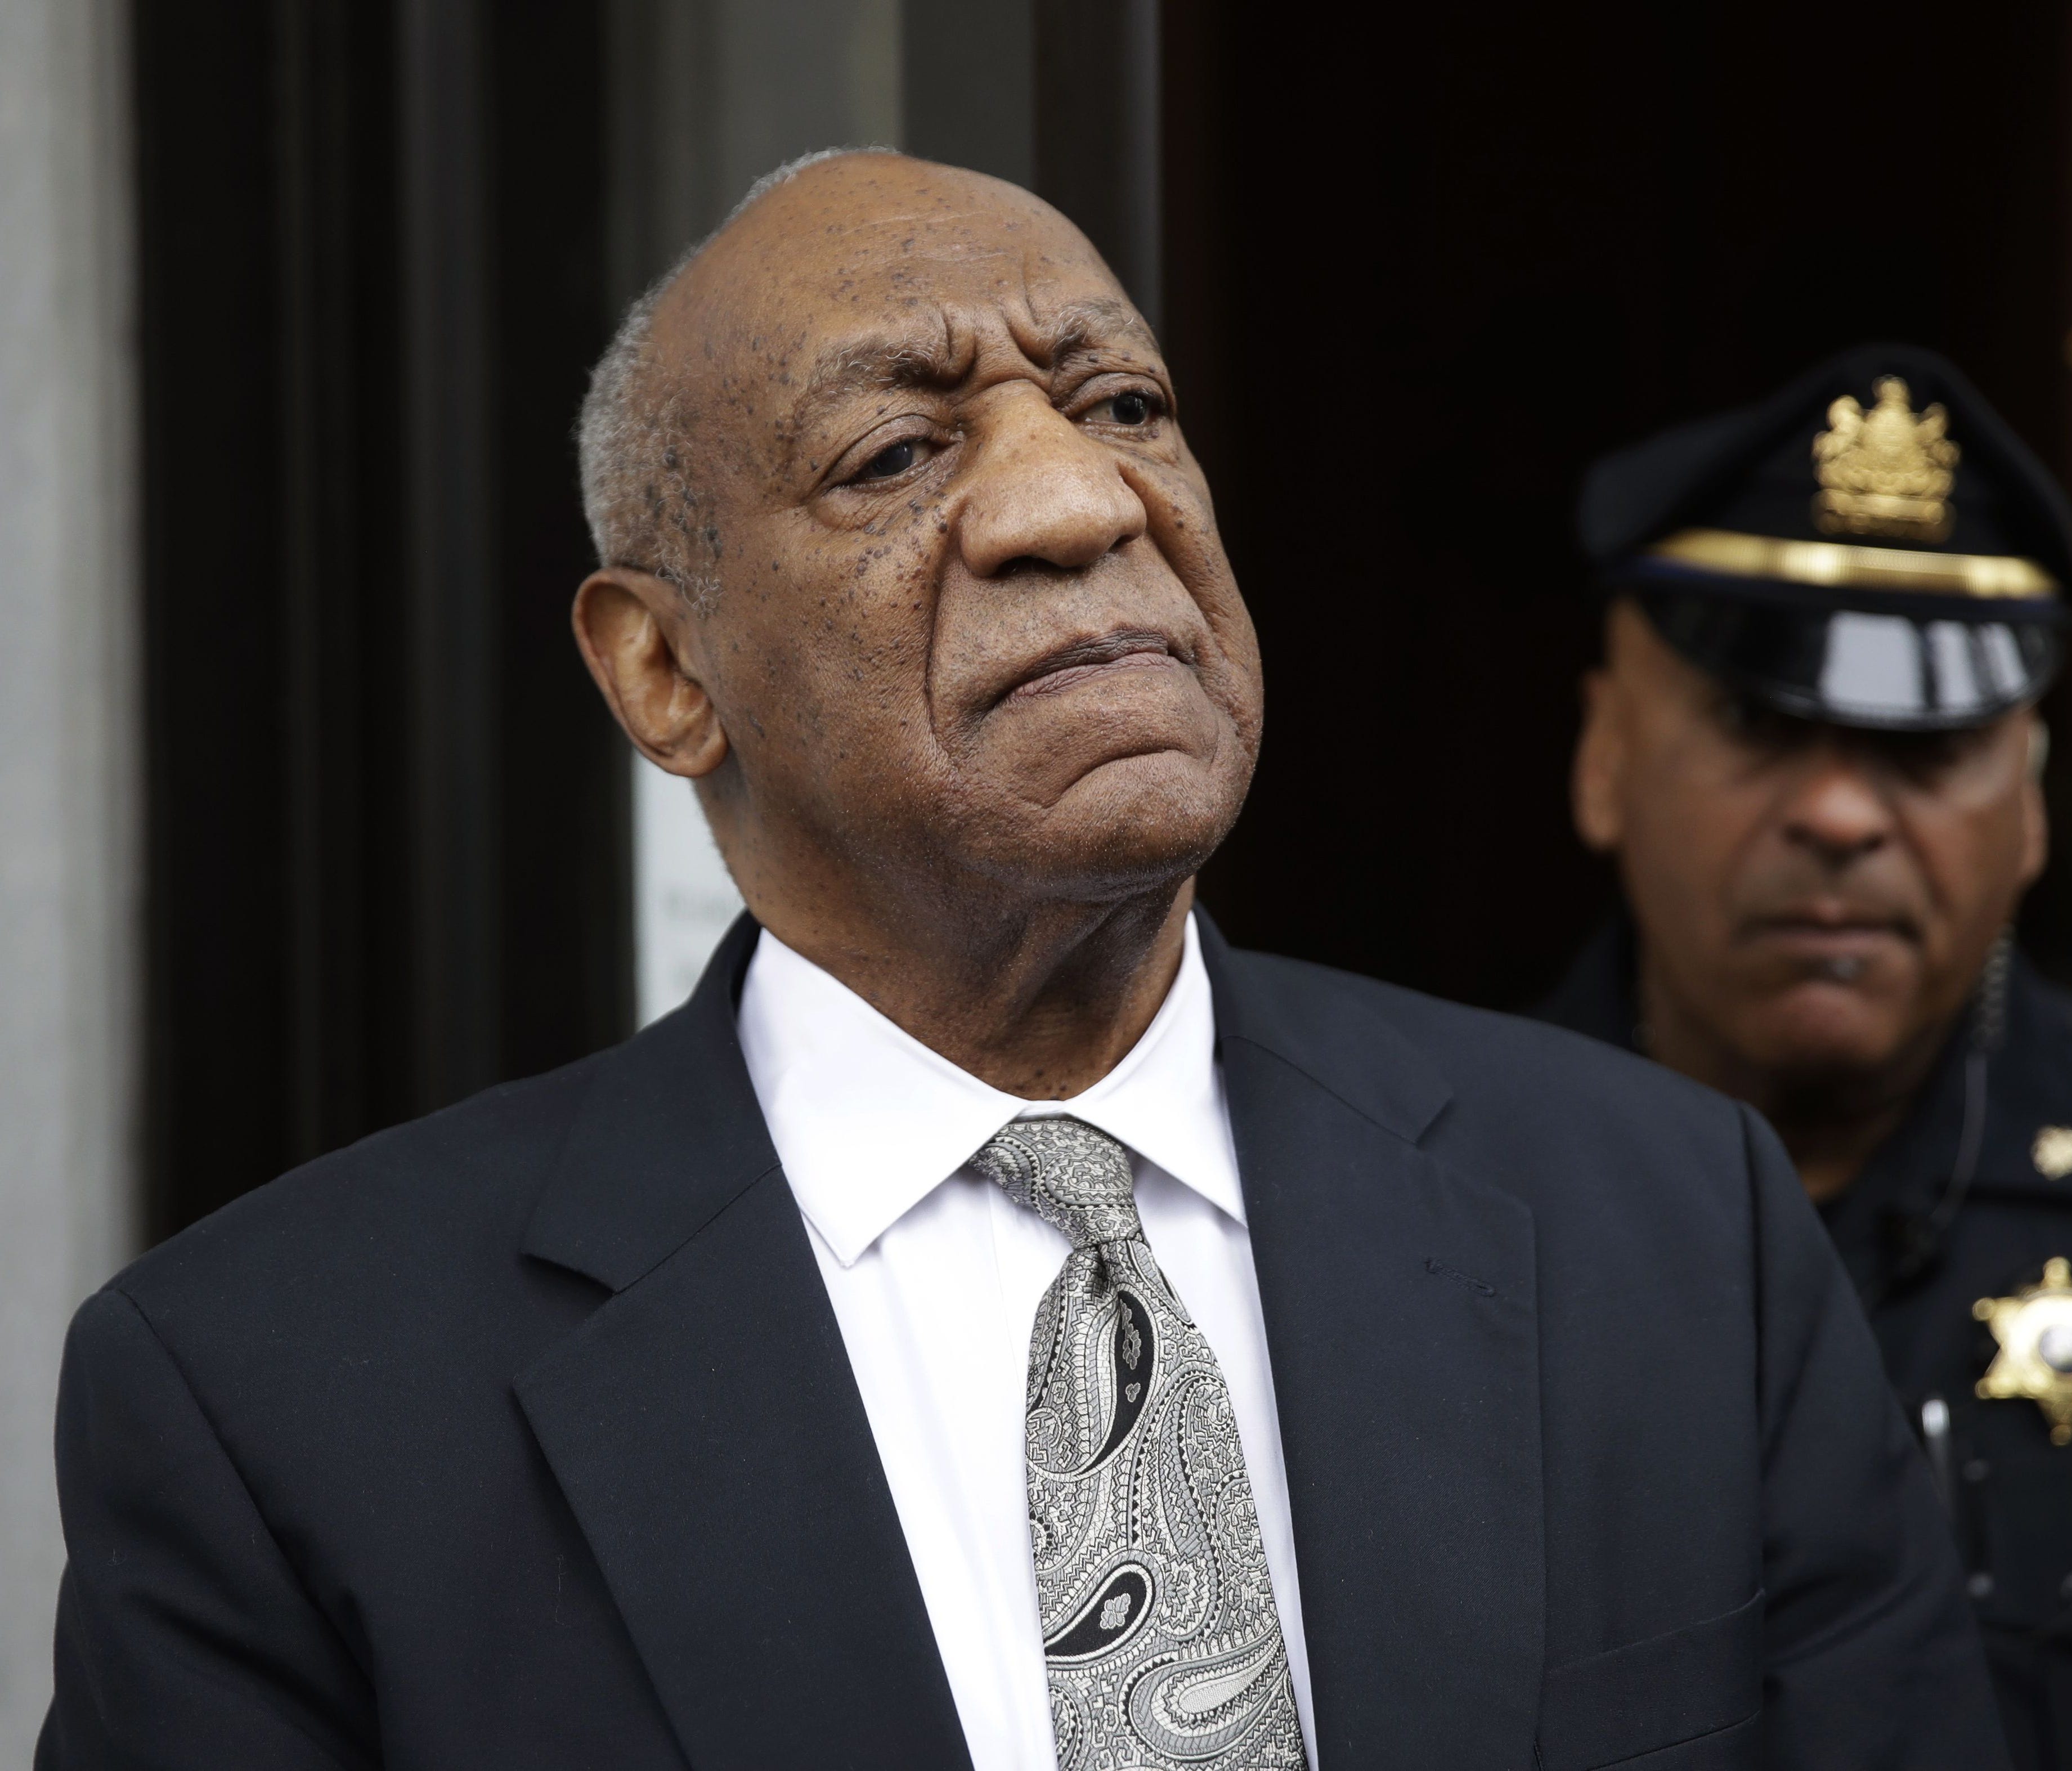 Bill Cosby exits the Montgomery County Courthouse on June 17, 2017, after a mistrial was declared in his sexual assault trial in Norristown, Pa.